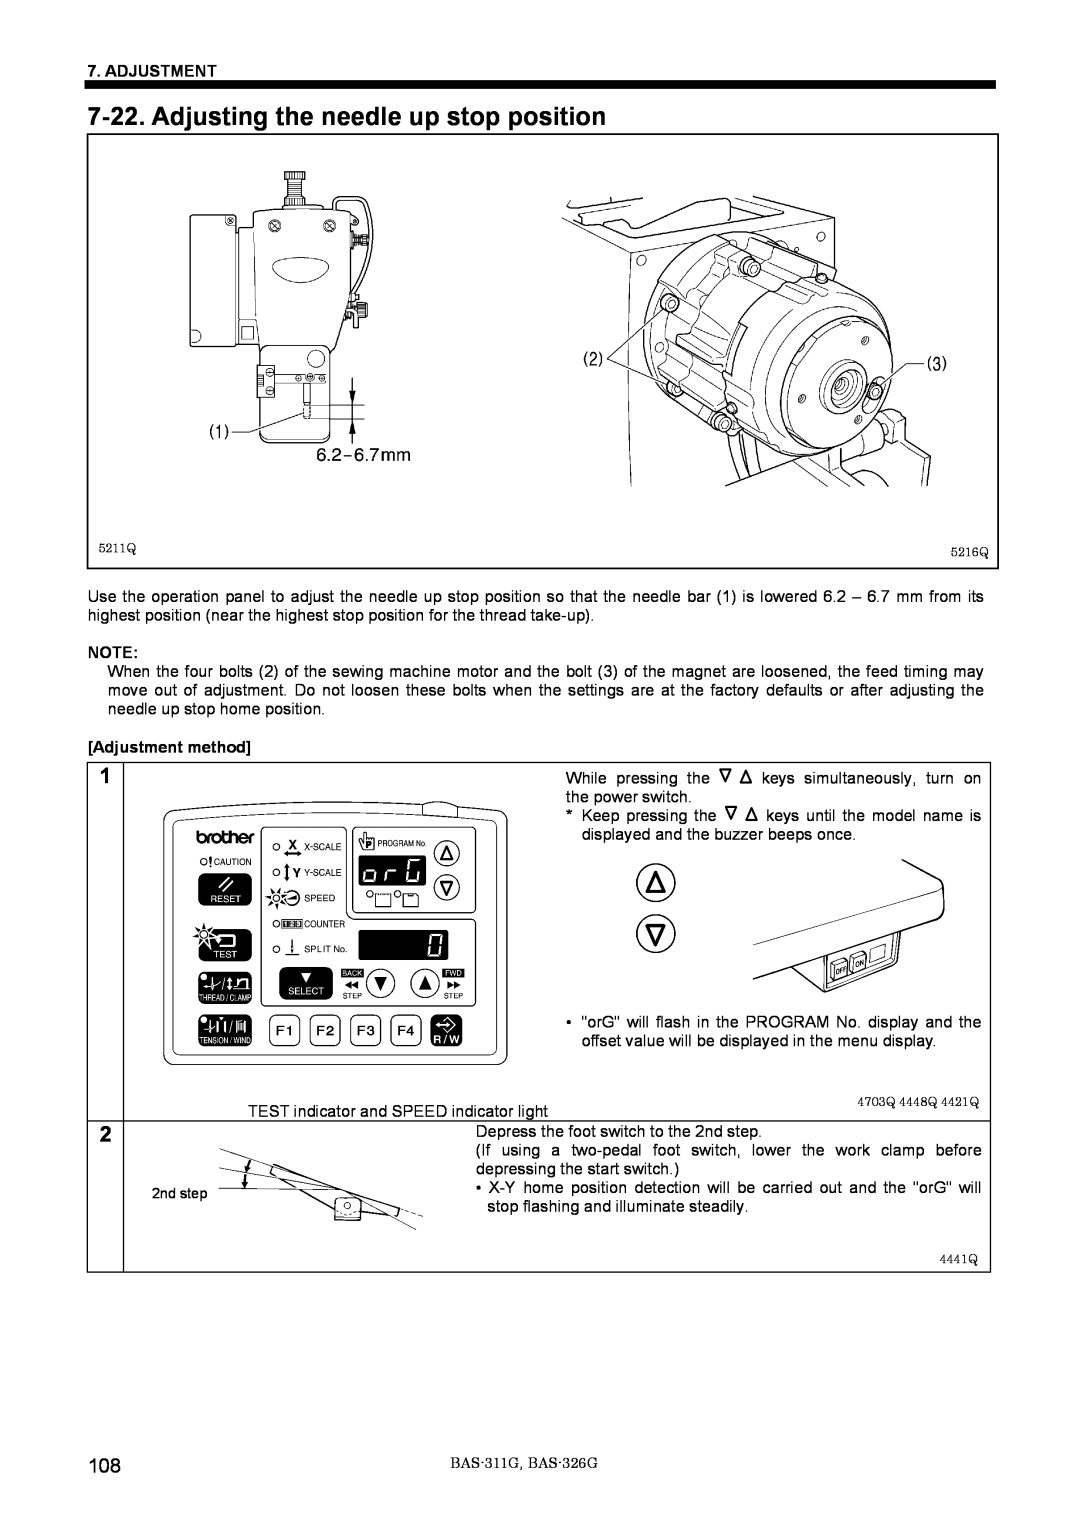 Brother BAS-311G service manual Adjusting the needle up stop position, Adjustment method 